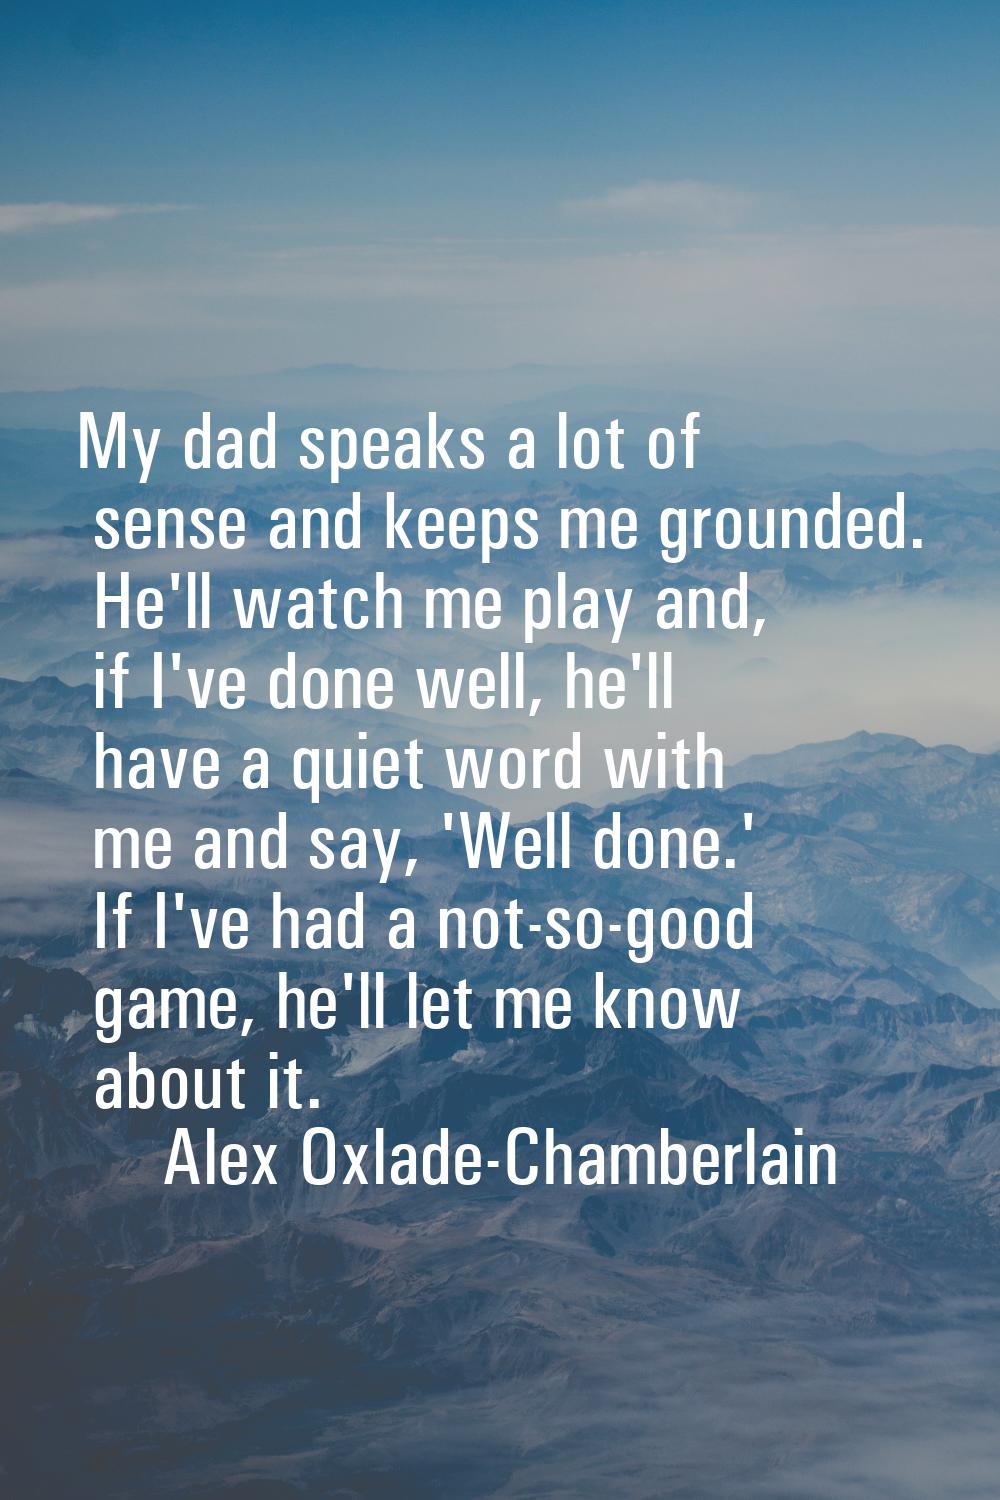 My dad speaks a lot of sense and keeps me grounded. He'll watch me play and, if I've done well, he'